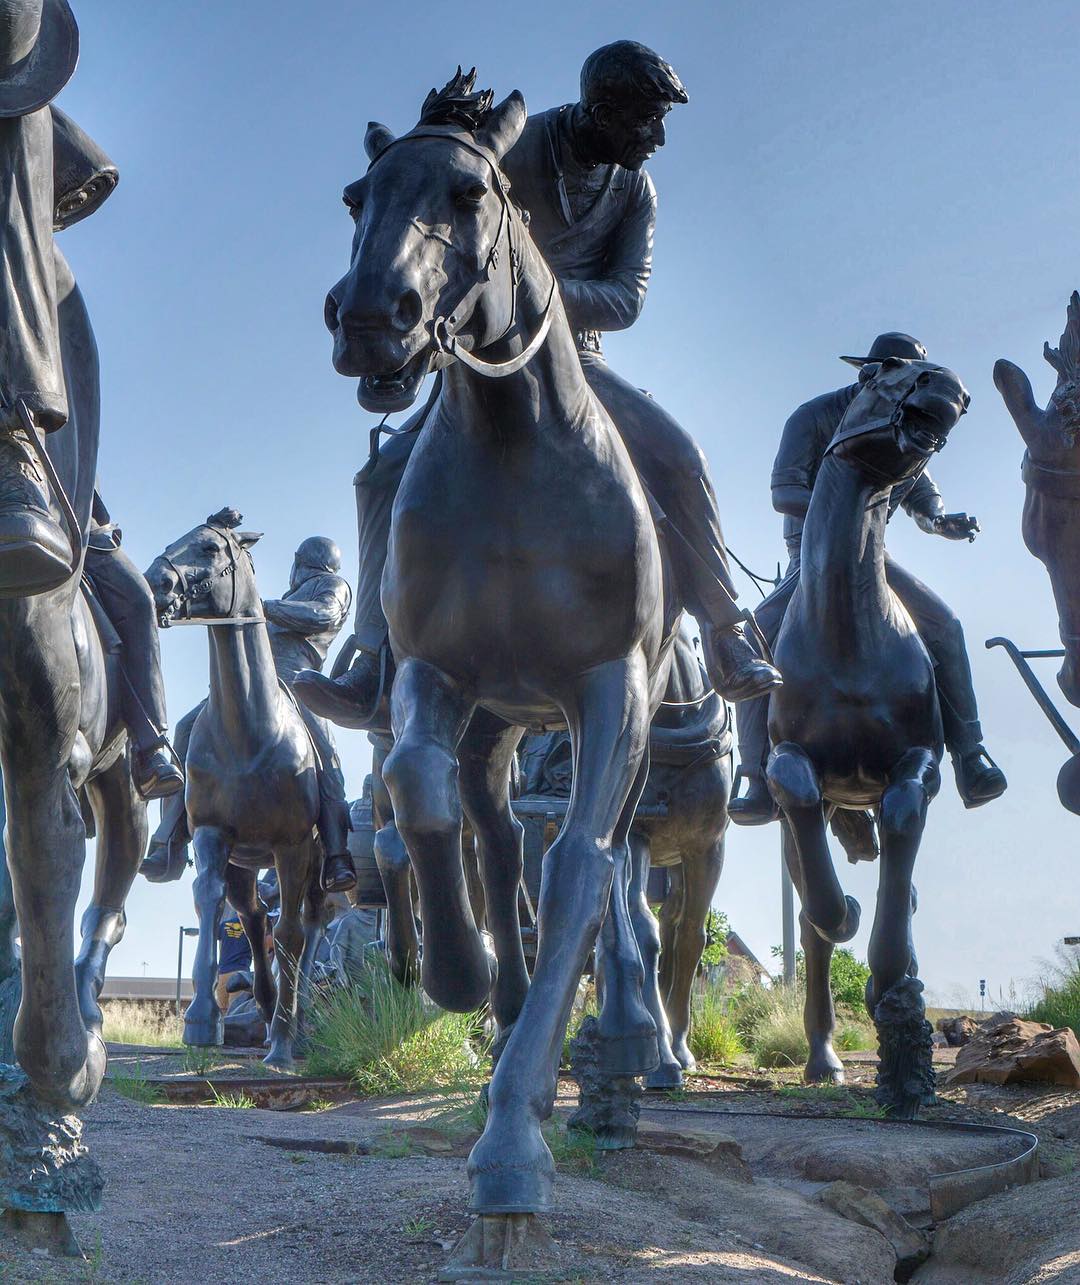 Statues of men on horses. Photo by Instagram user @wbannister